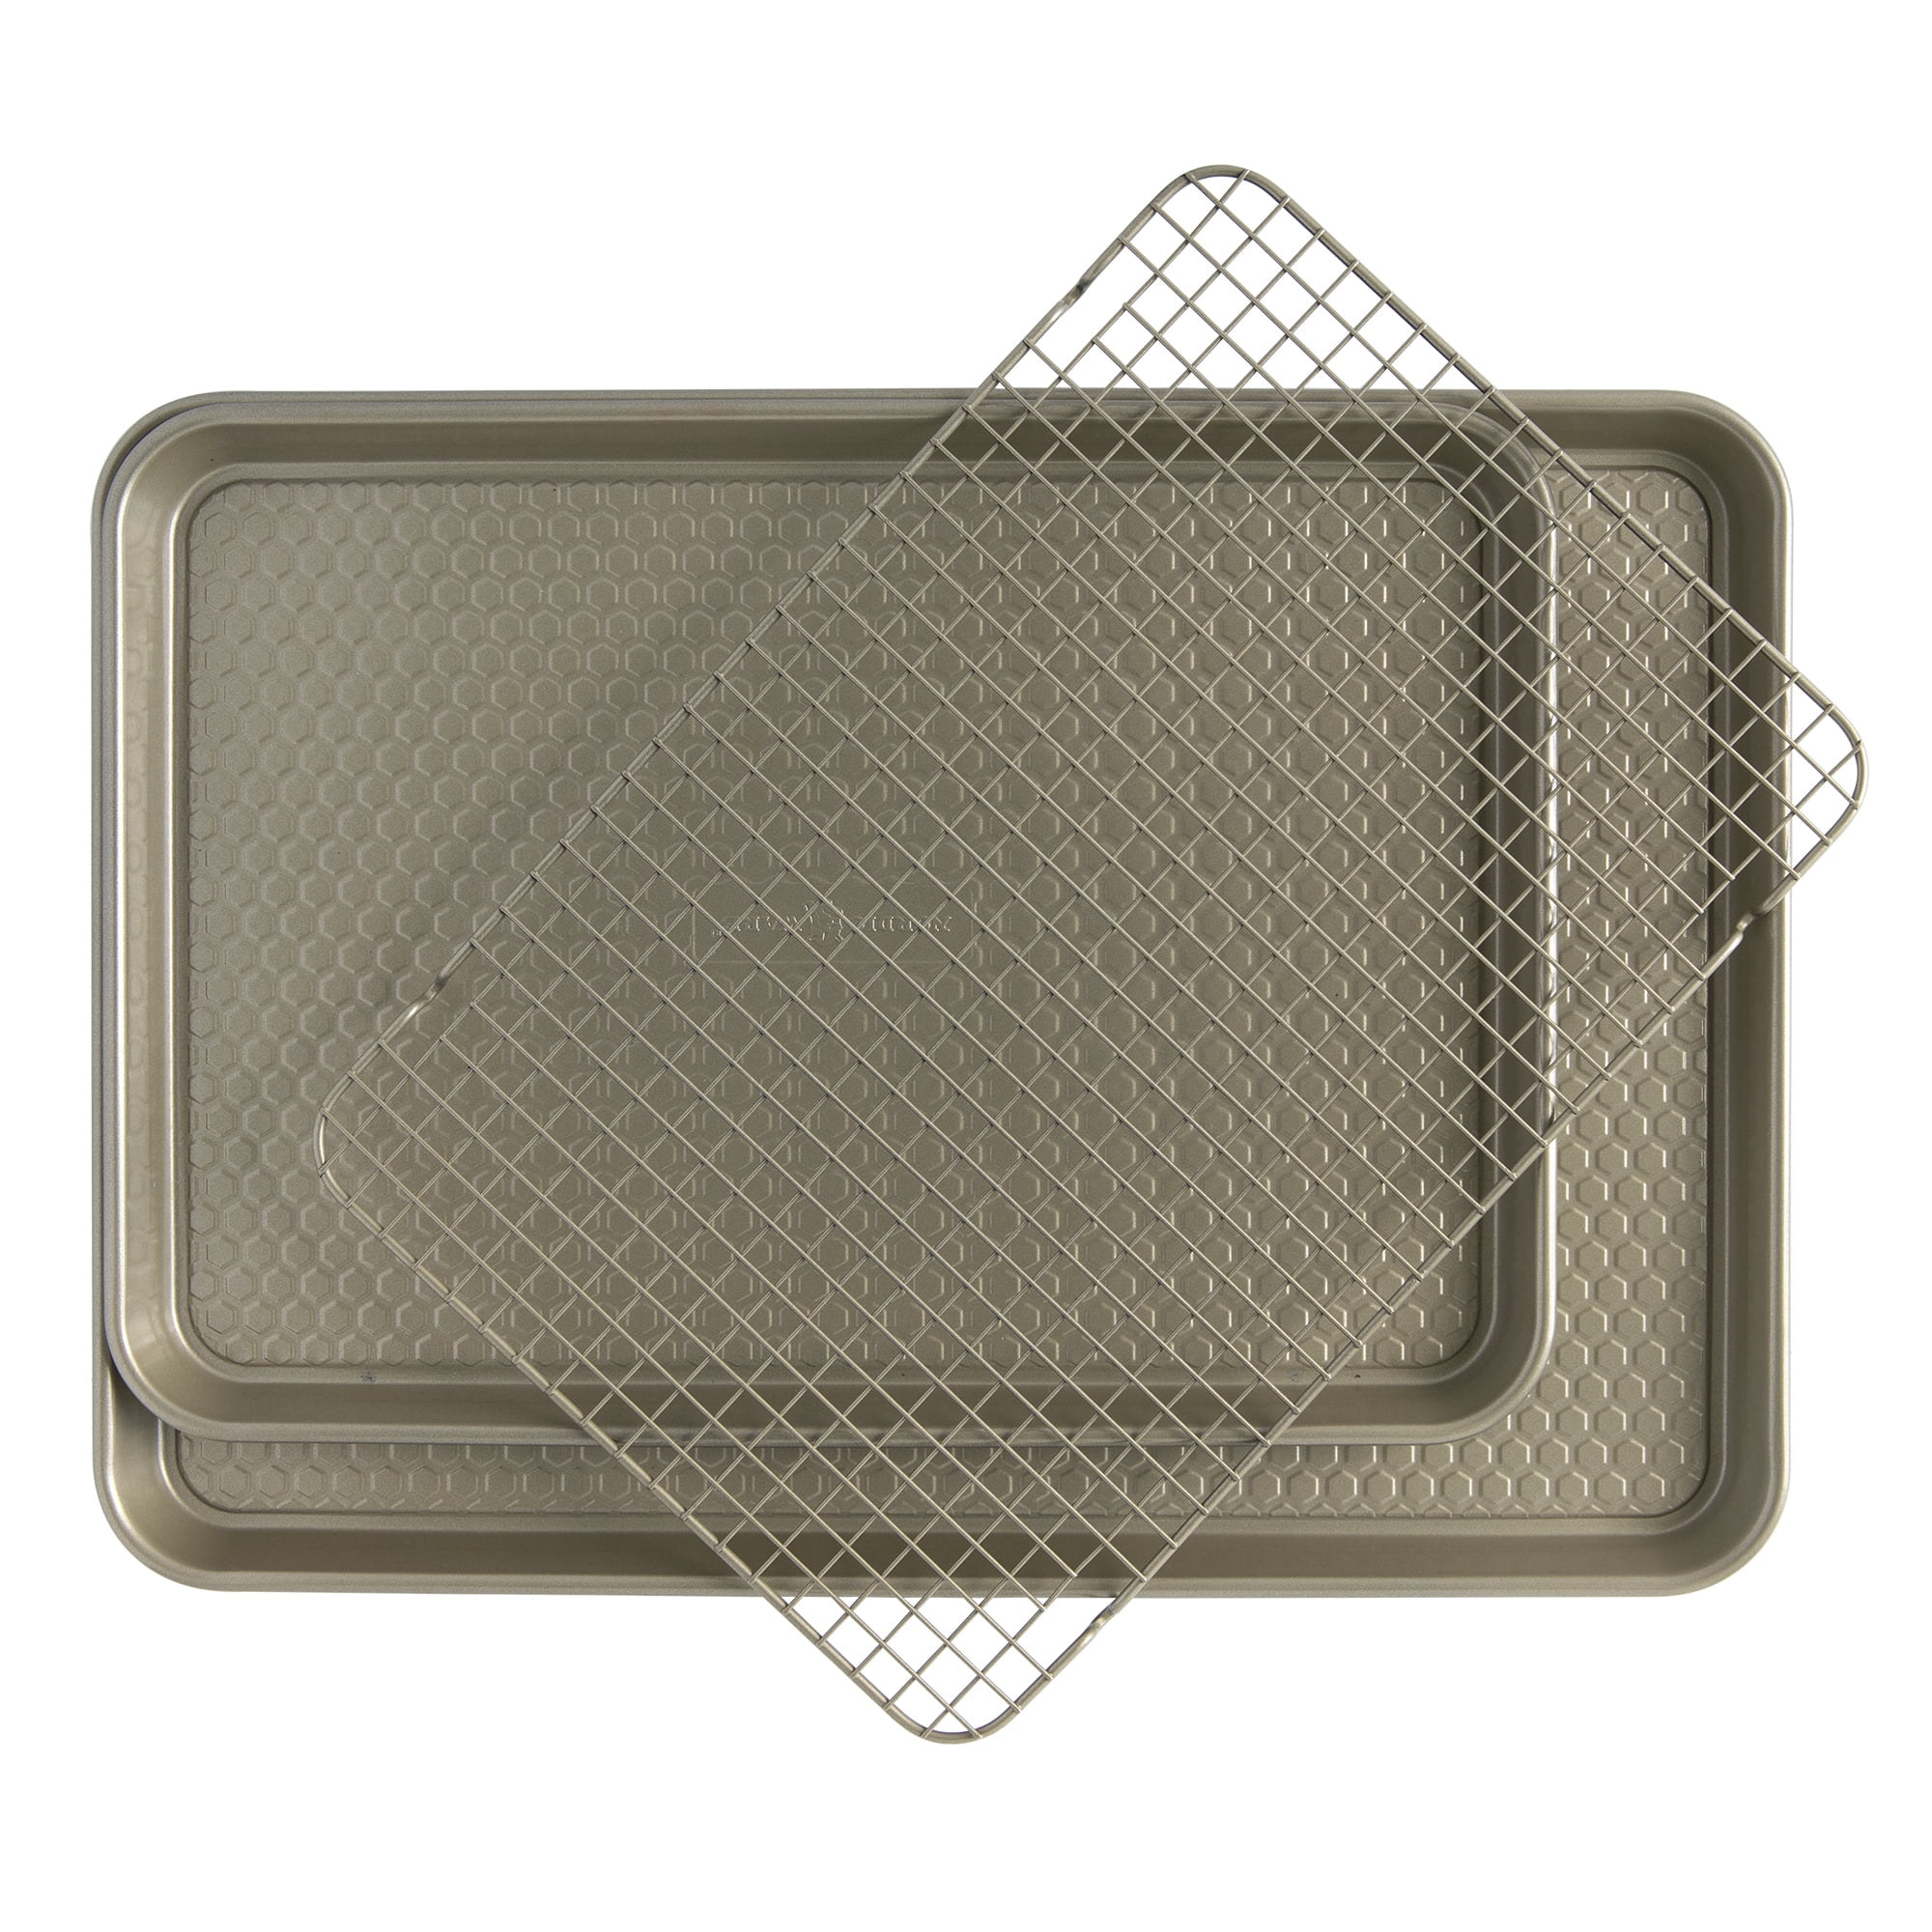 Nordic Ware Baking and Cooling Rack Set- Silver, 3 Piece - Harris